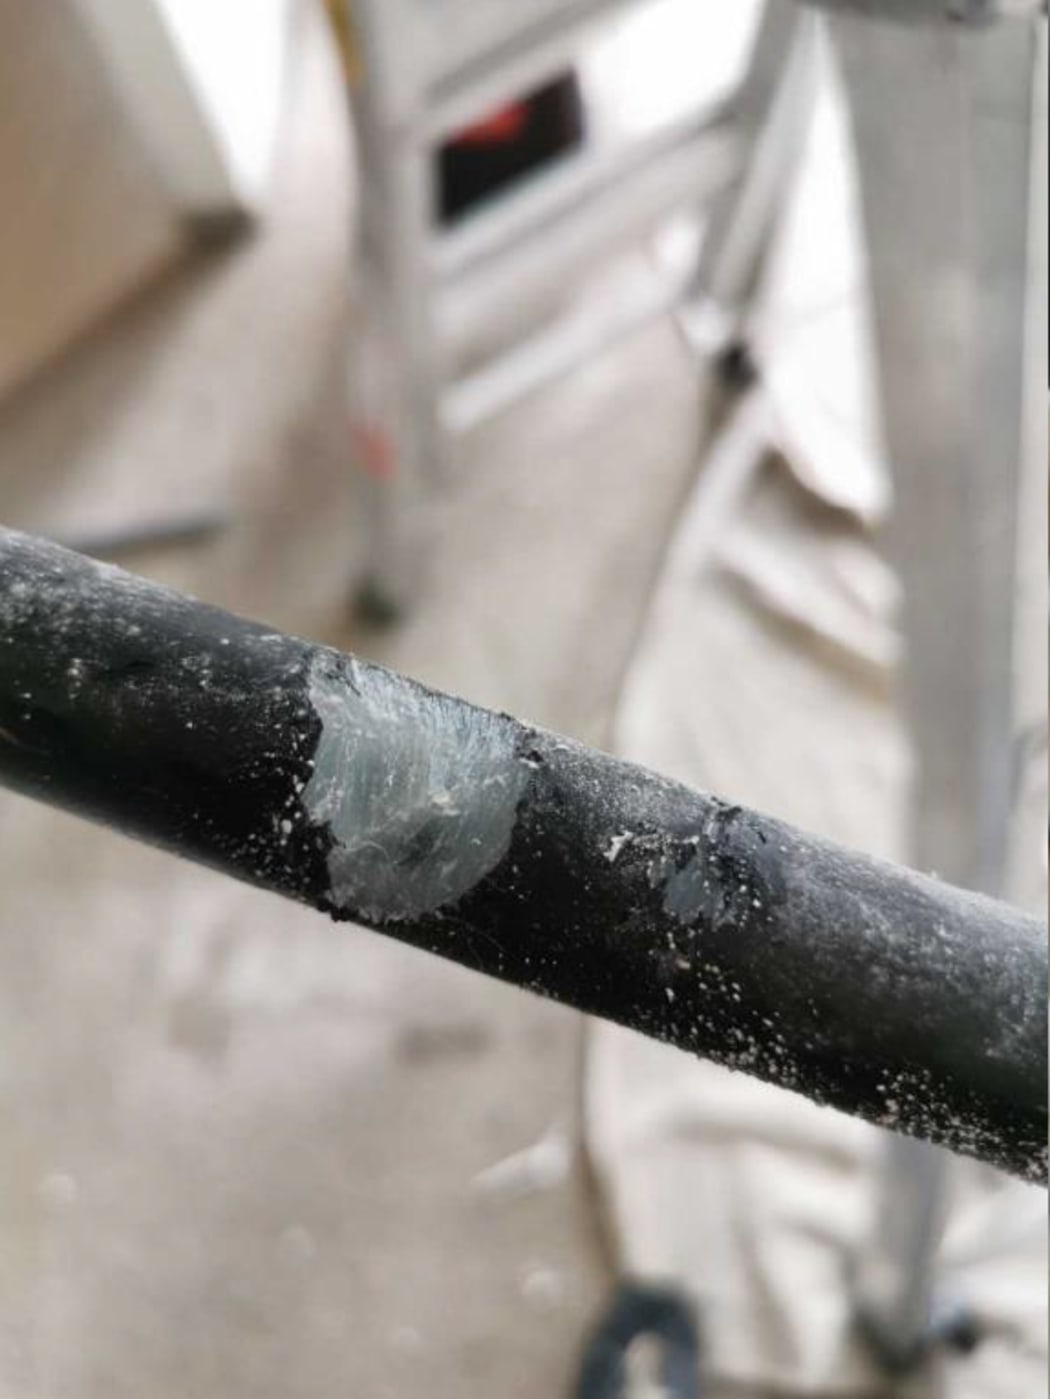 The leak started  after rats chewed through a water pipe.